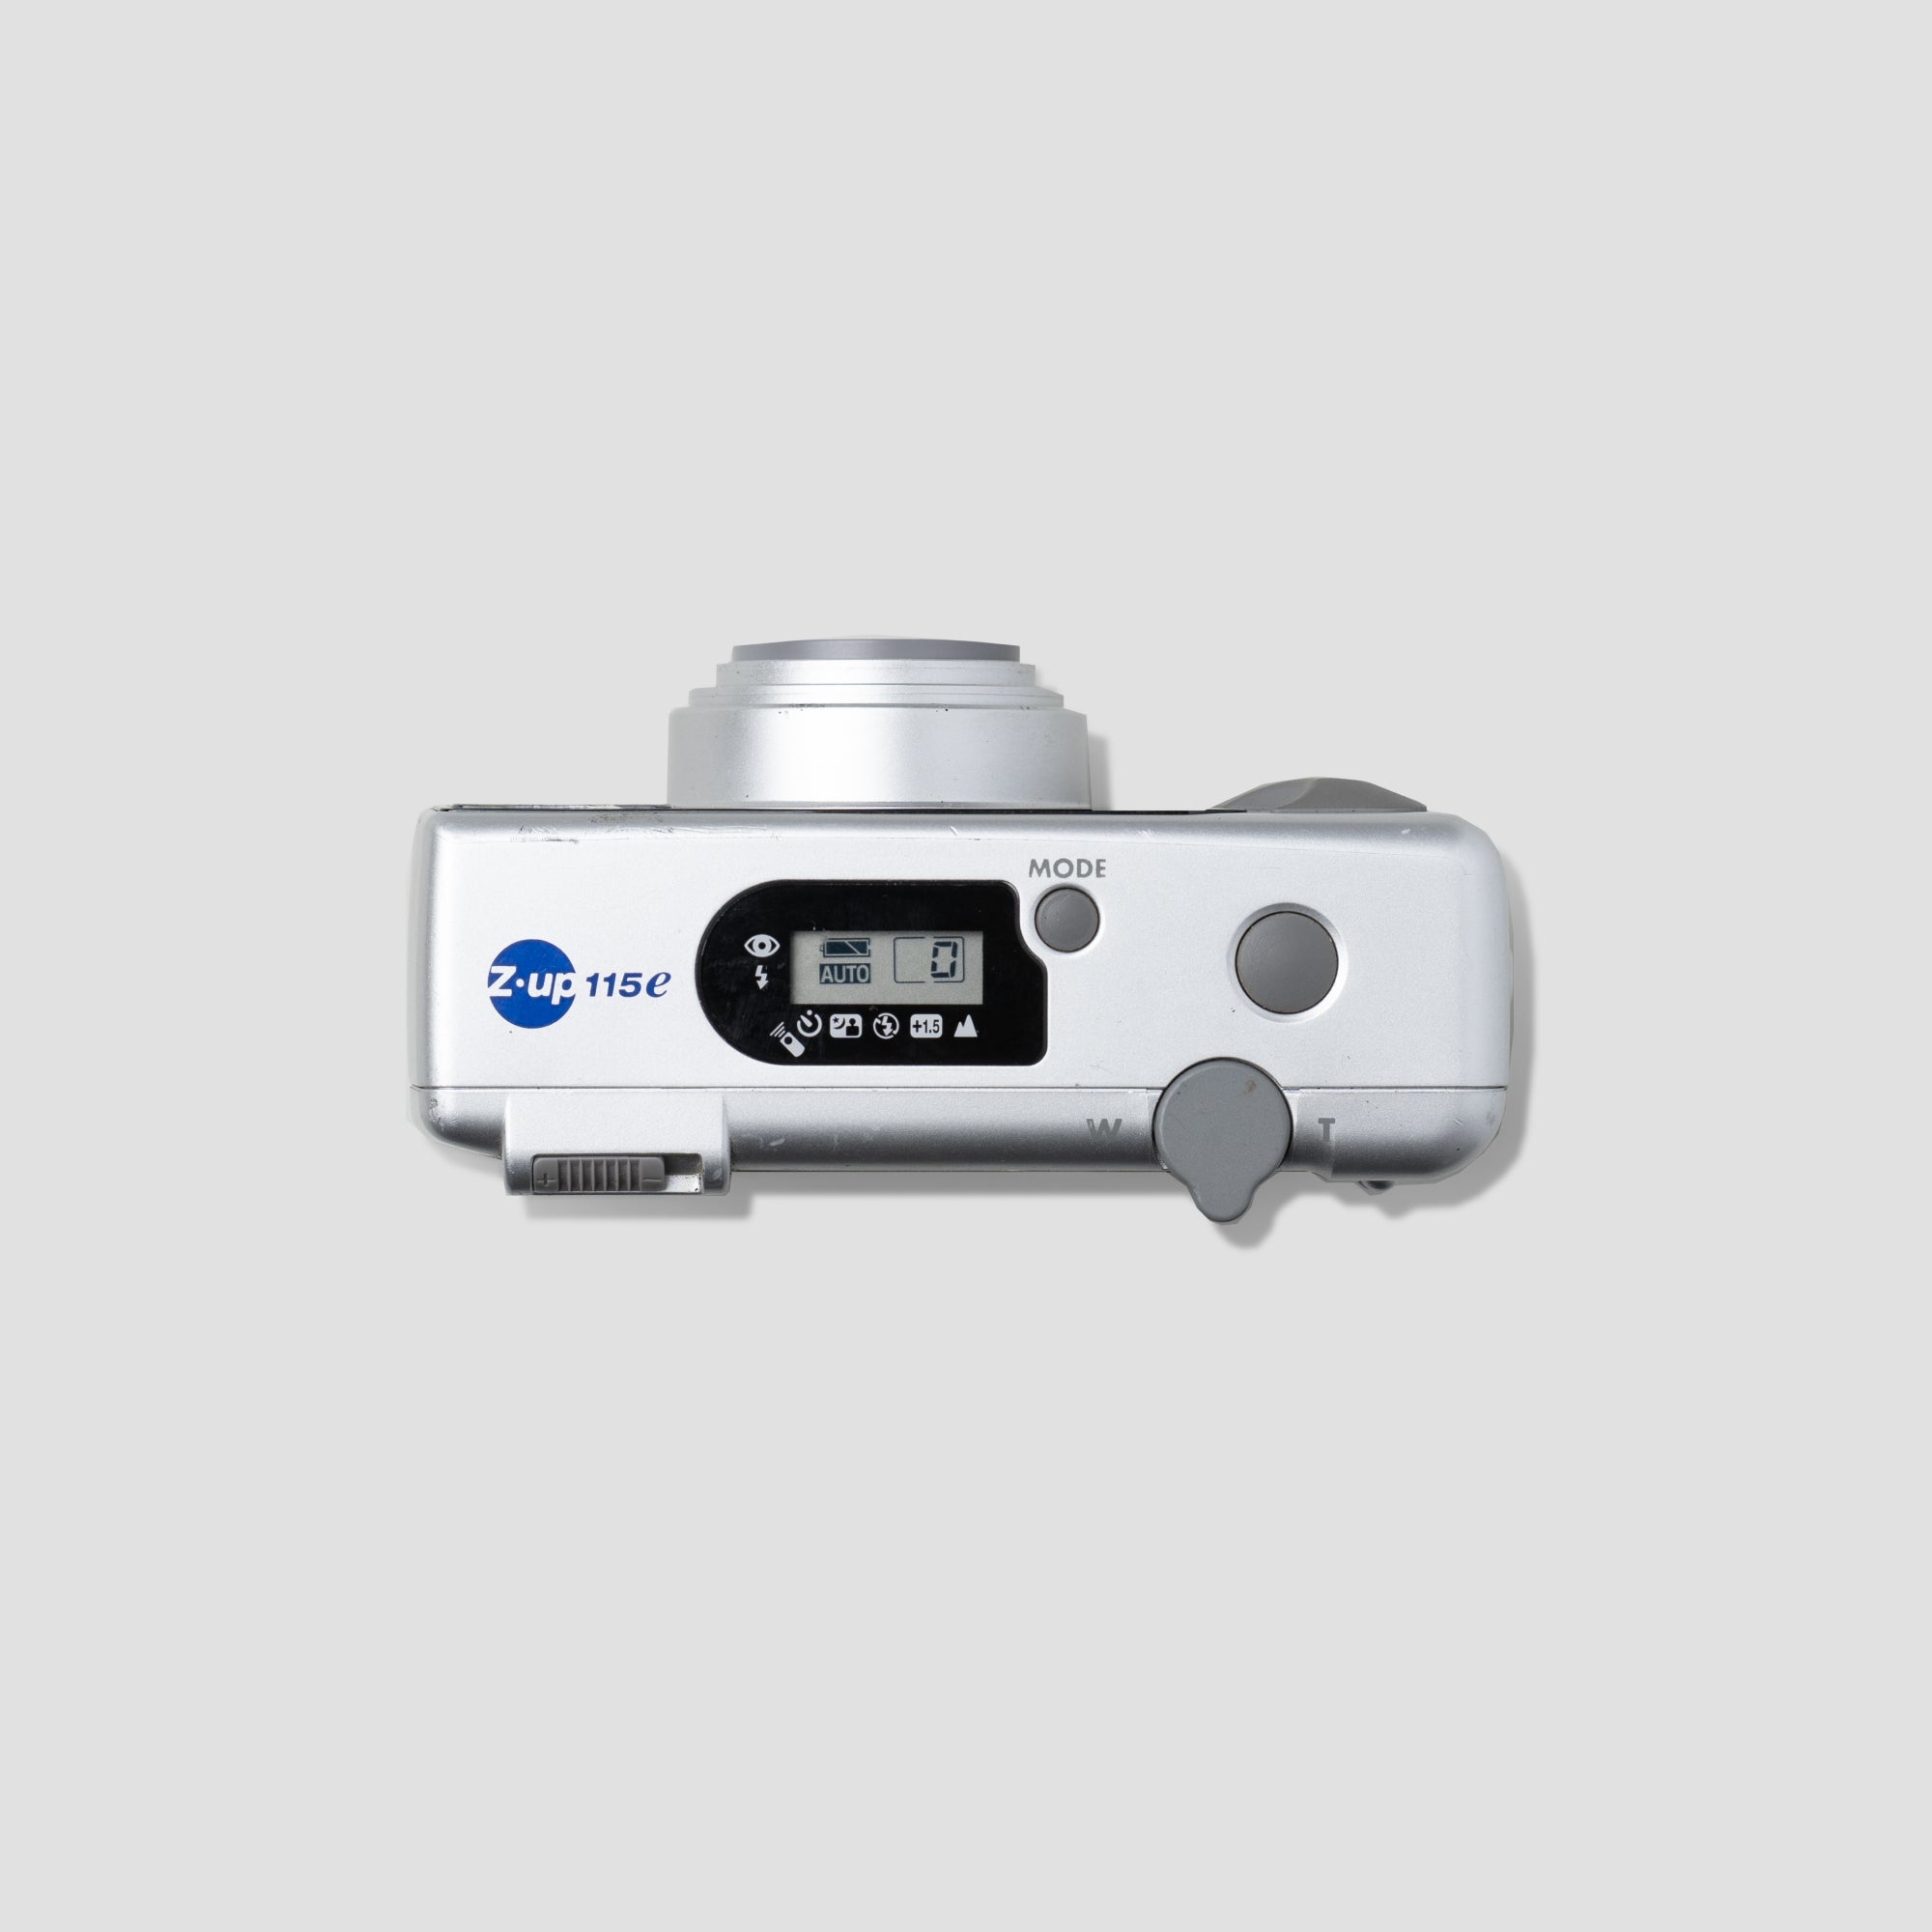 Buy Konica Z-up 125e now at Analogue Amsterdam